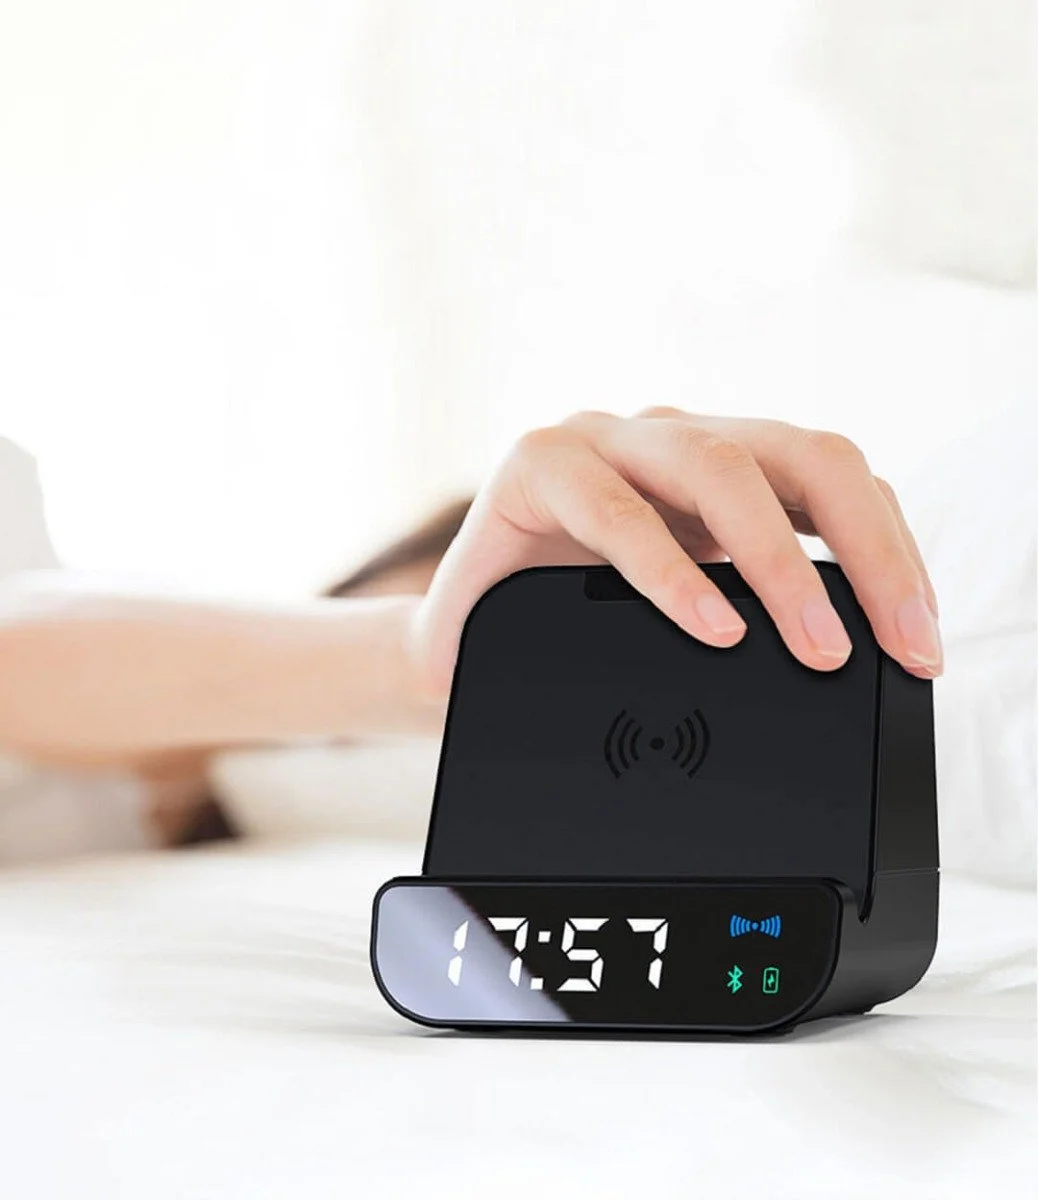 Portable Wireless Charger with Alarm Clock by Jasani